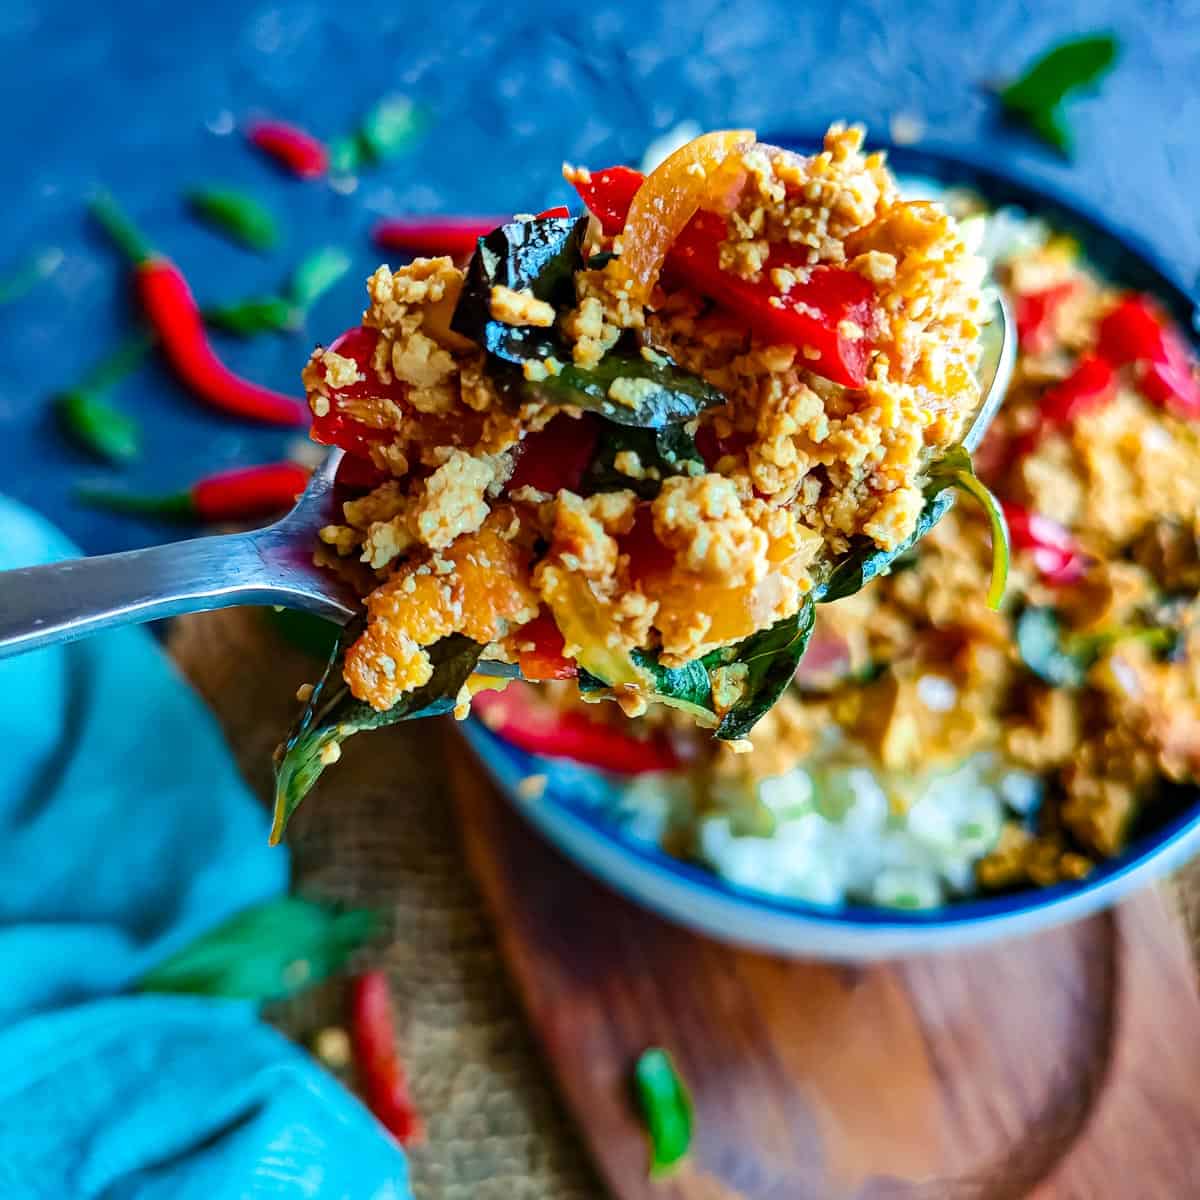 Thai basil tofu served with rice in a blue bowl.